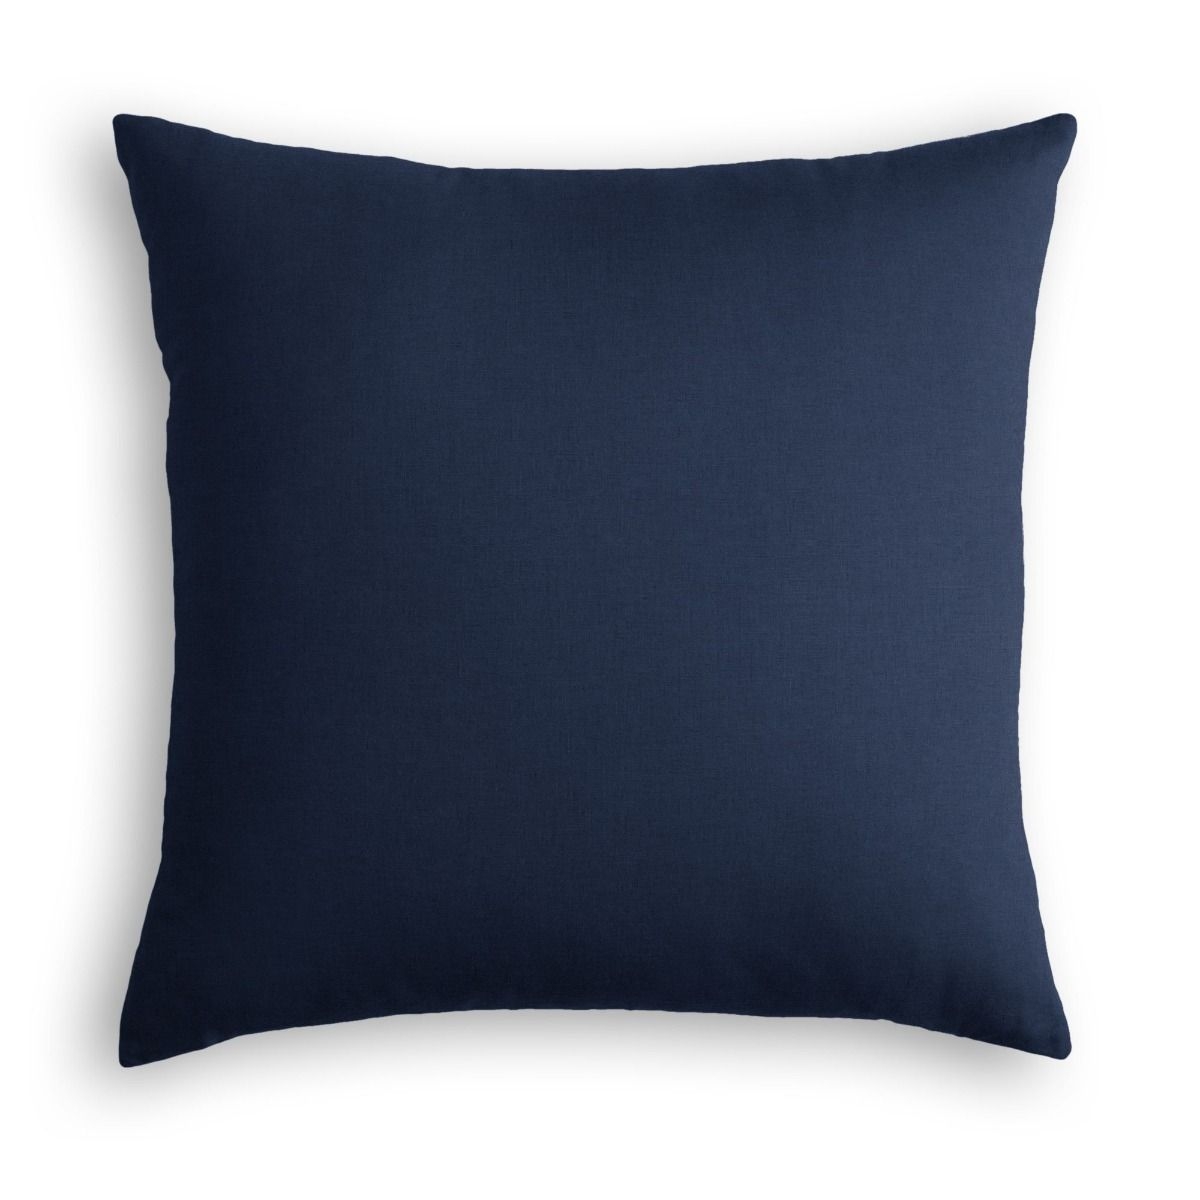 Classic Linen Pillow, Indigo, 22" x 22" with down fill - Image 0